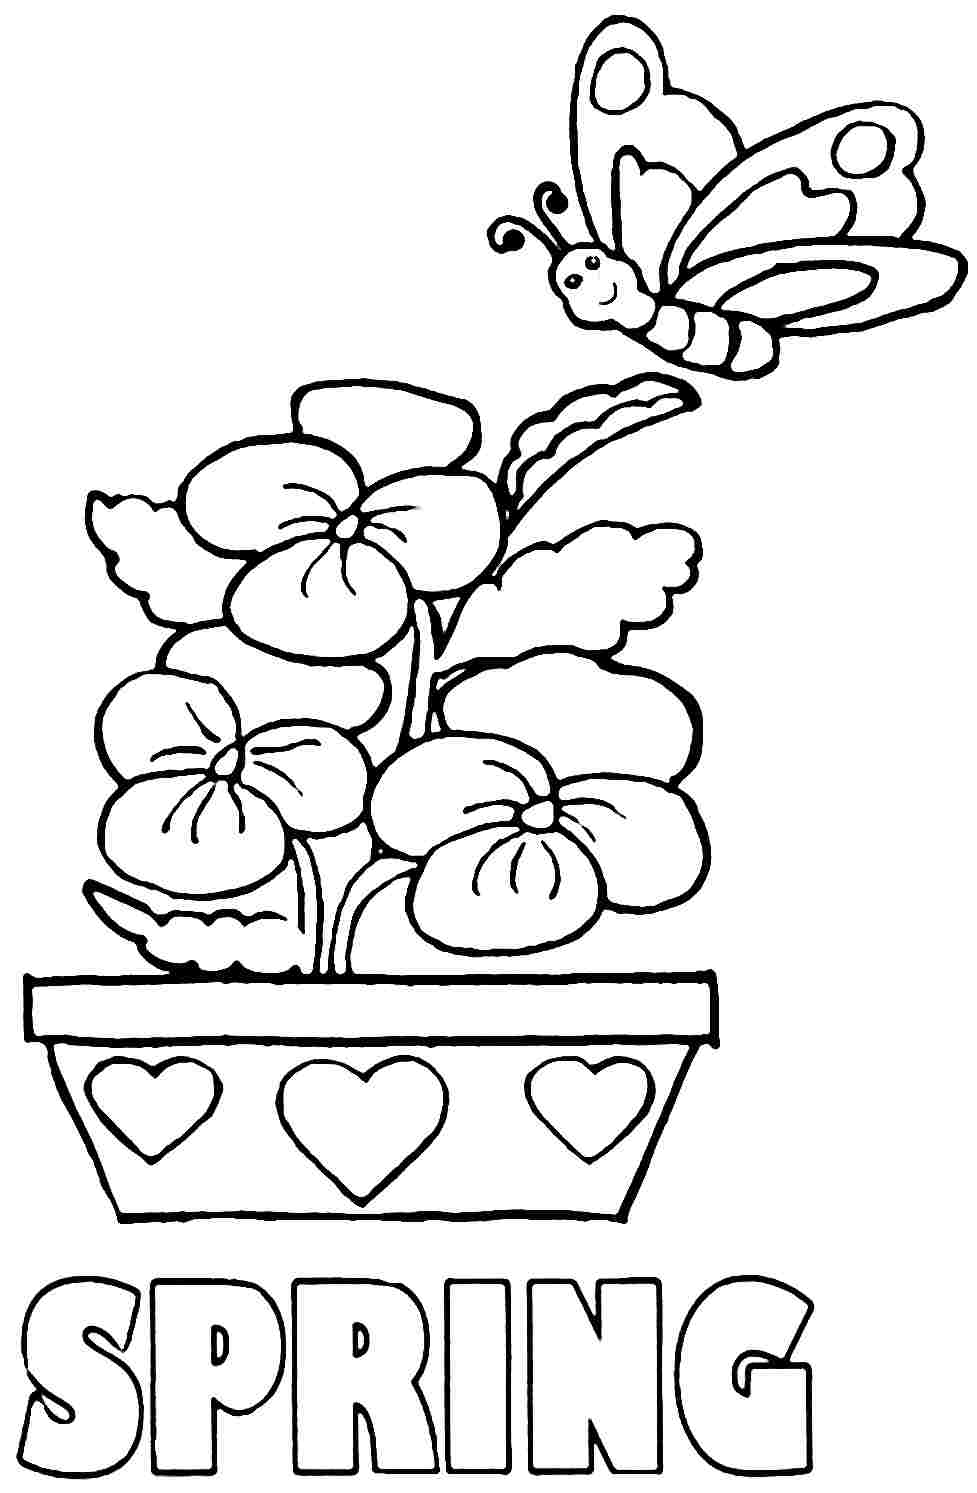 43+ Easy Coloring Sheets For Toddlers